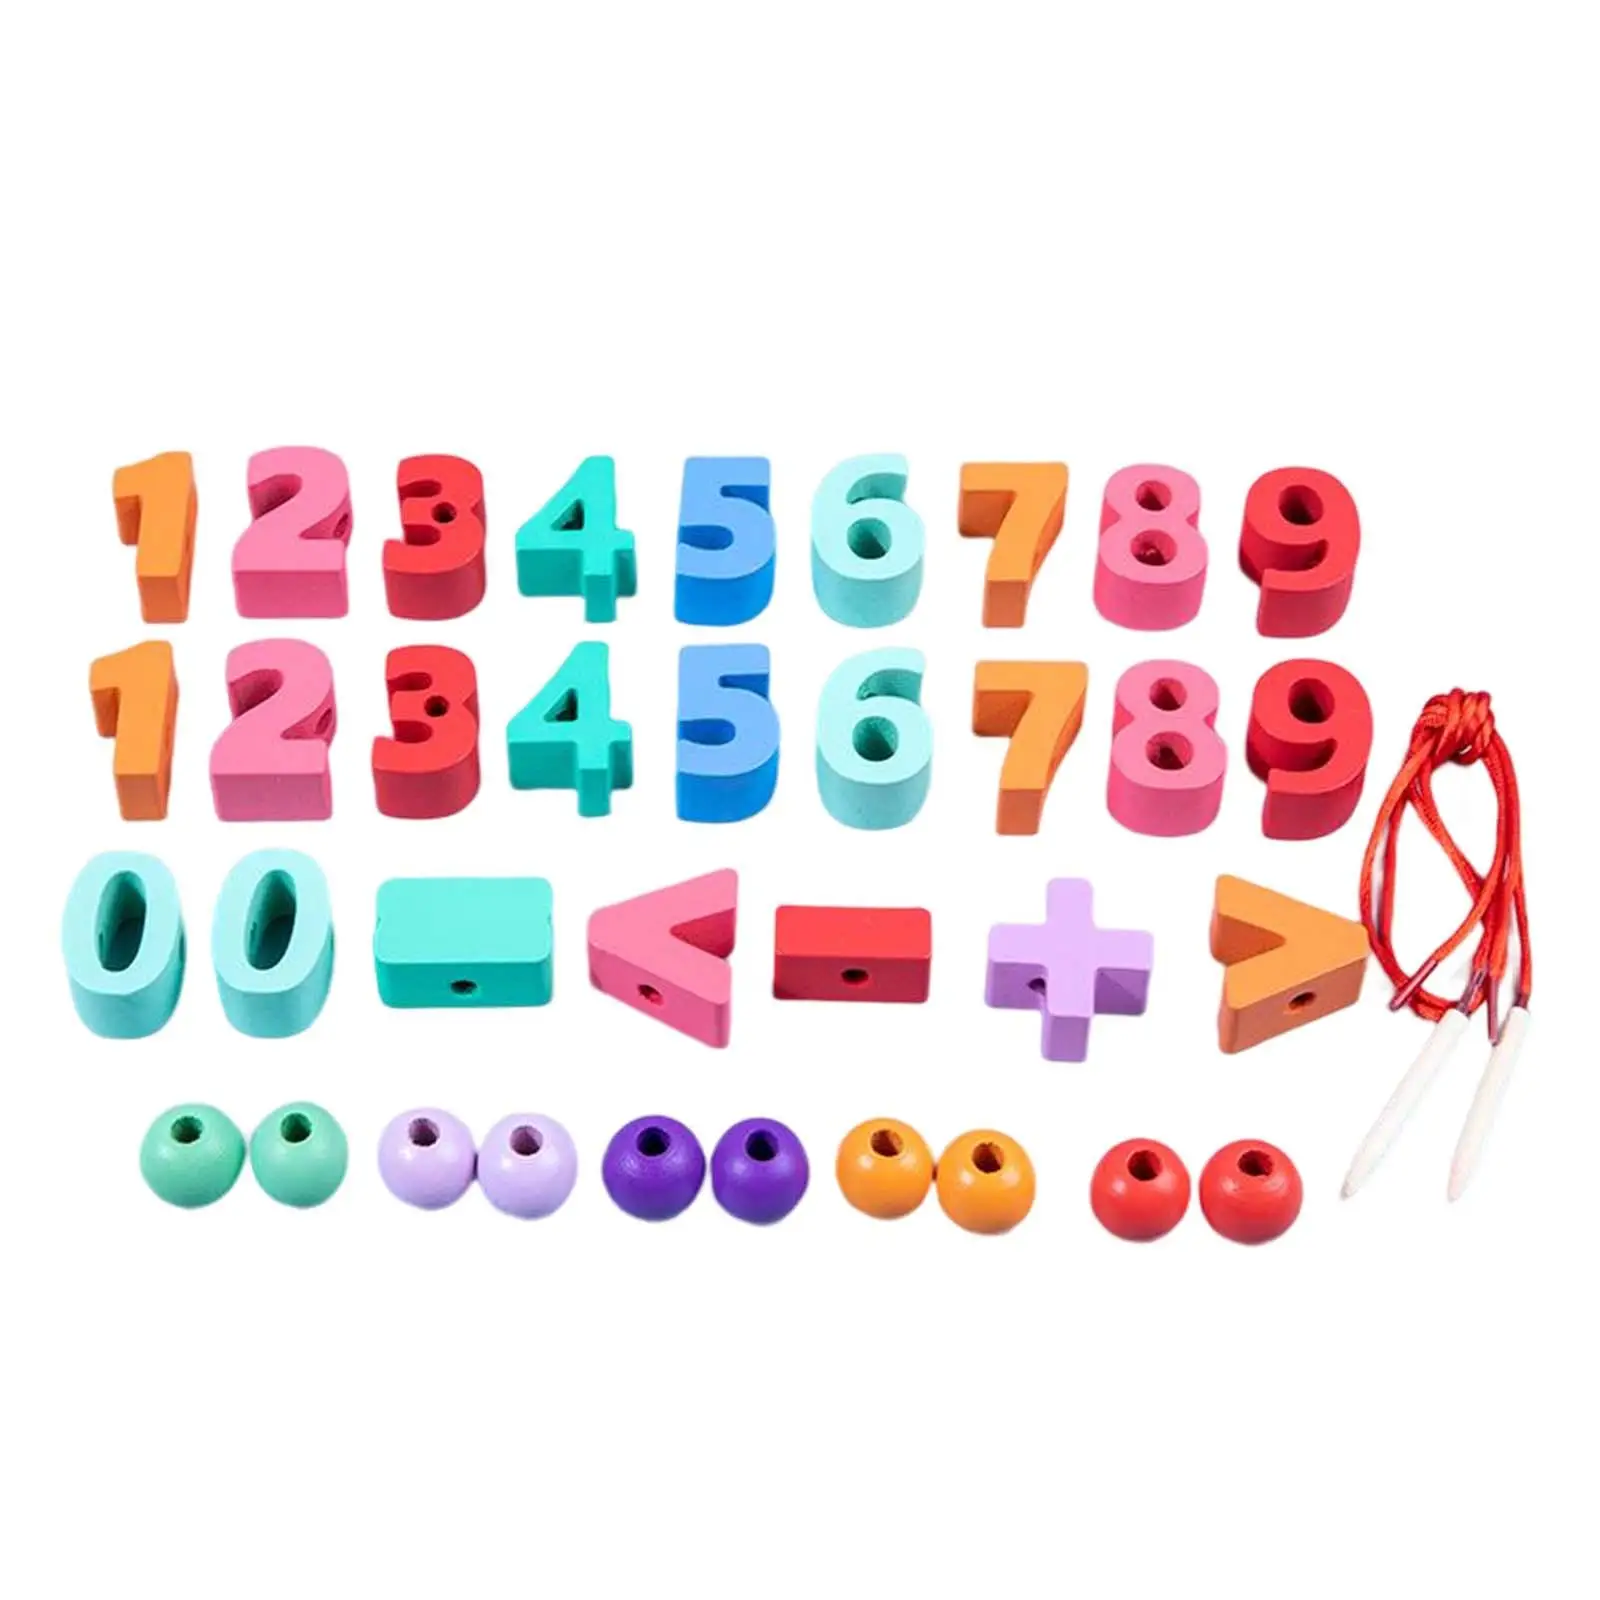 Threading Toys Early Educational Toys Lacing Beads Set for Birthday Gifts